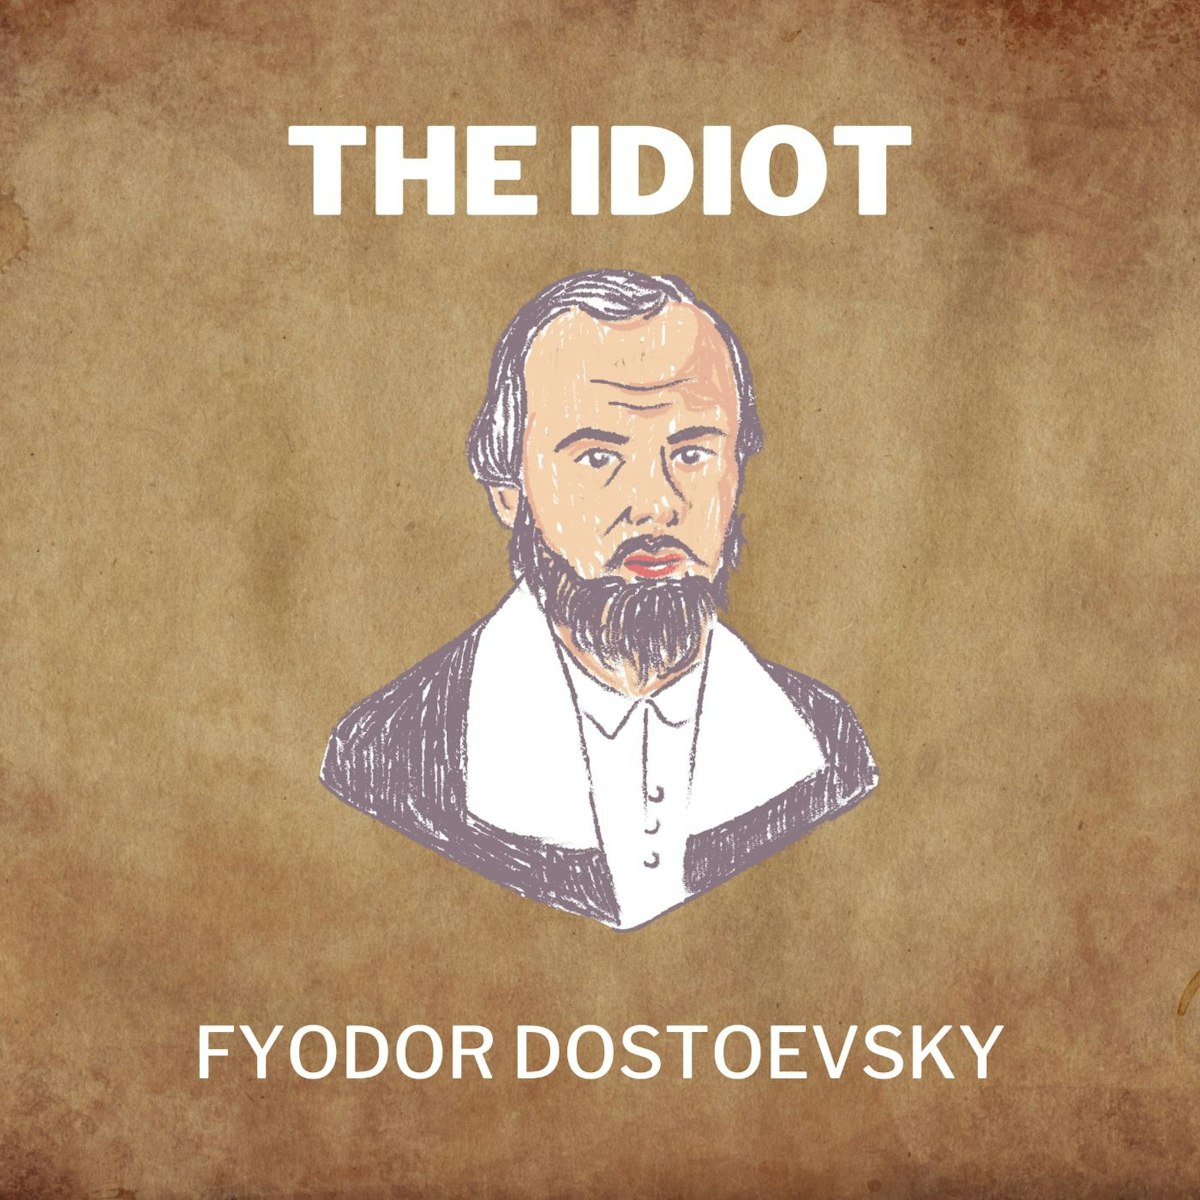 featured image - The Idiot by Fyodor Dostoyevsky - Table of Links